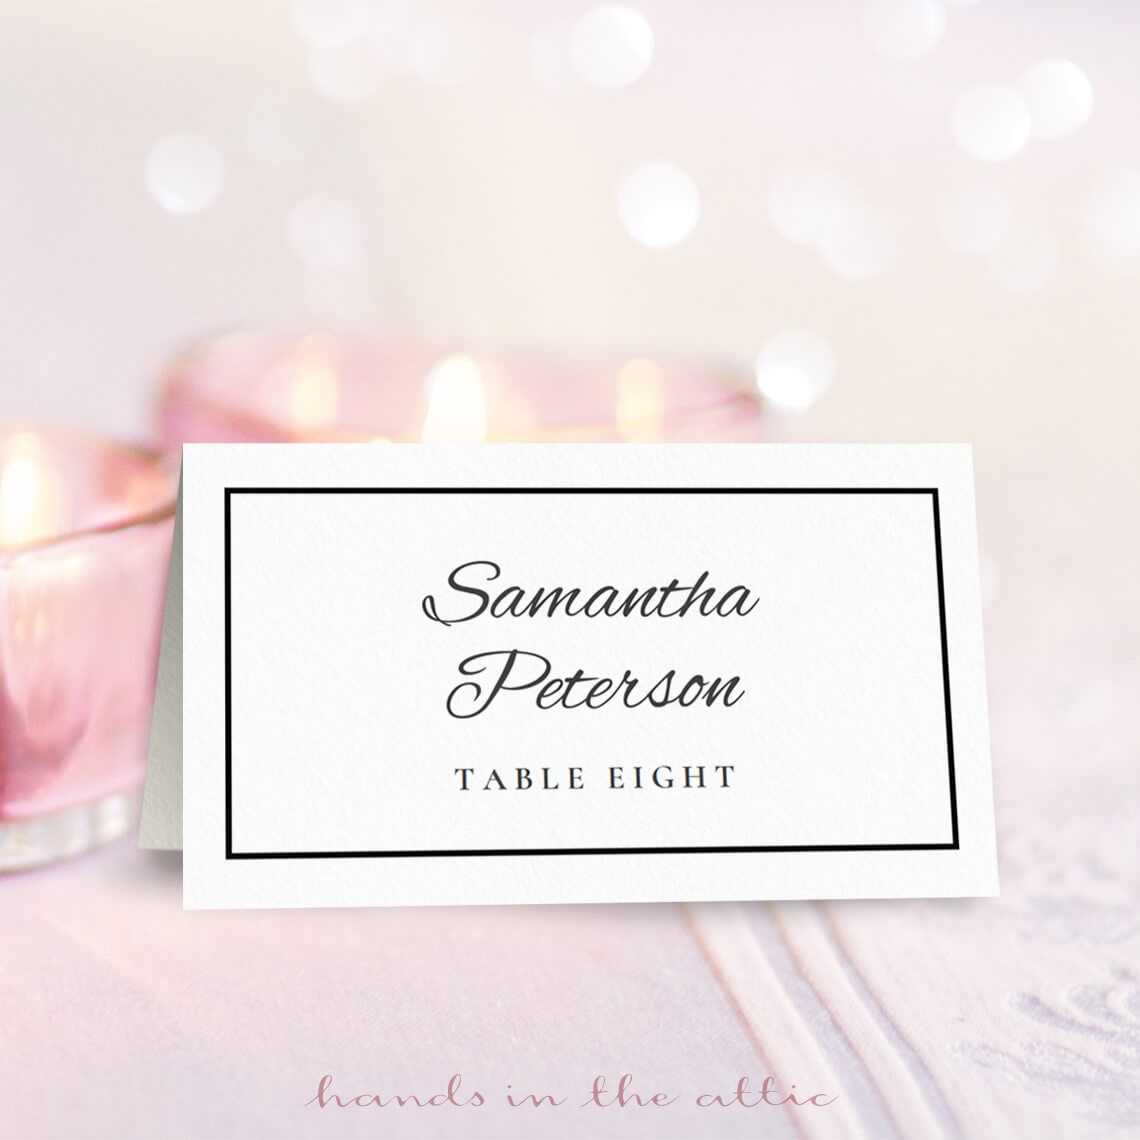 001 Free Place Card Template Excellent Ideas Name Microsoft For Anniversary Card Template Word